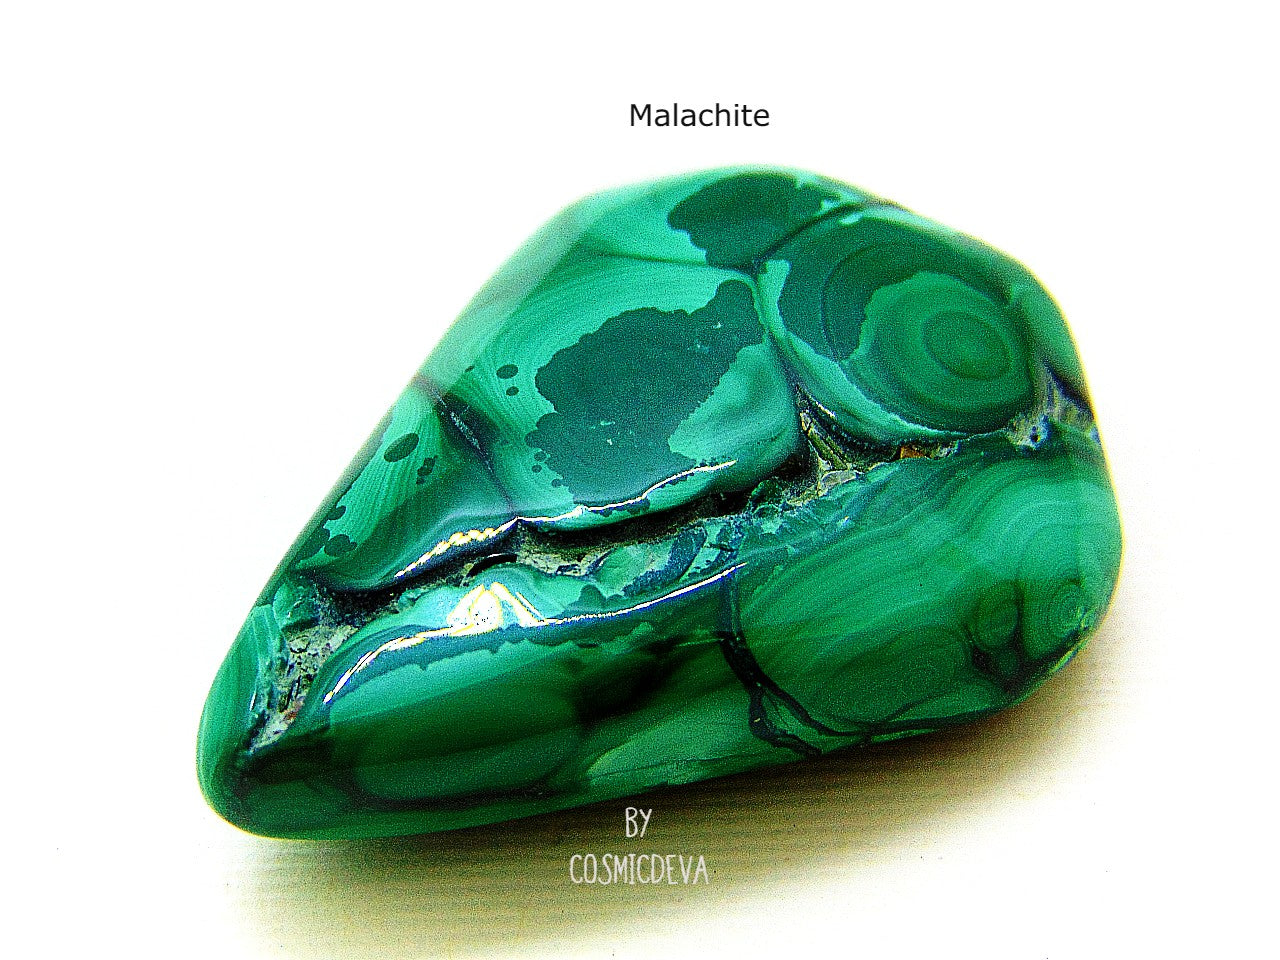 Outstanding and beautiful high quality polished botryoidal green malachite gemstone cabochon. Malachite is a copper ore mineral and has the reputation to protect against the evil eye, witchcraft and evil spirits. This beautiful malachite stone would be a great addition to you Chrystal collection, Chrystal healing or even for jewelry making.